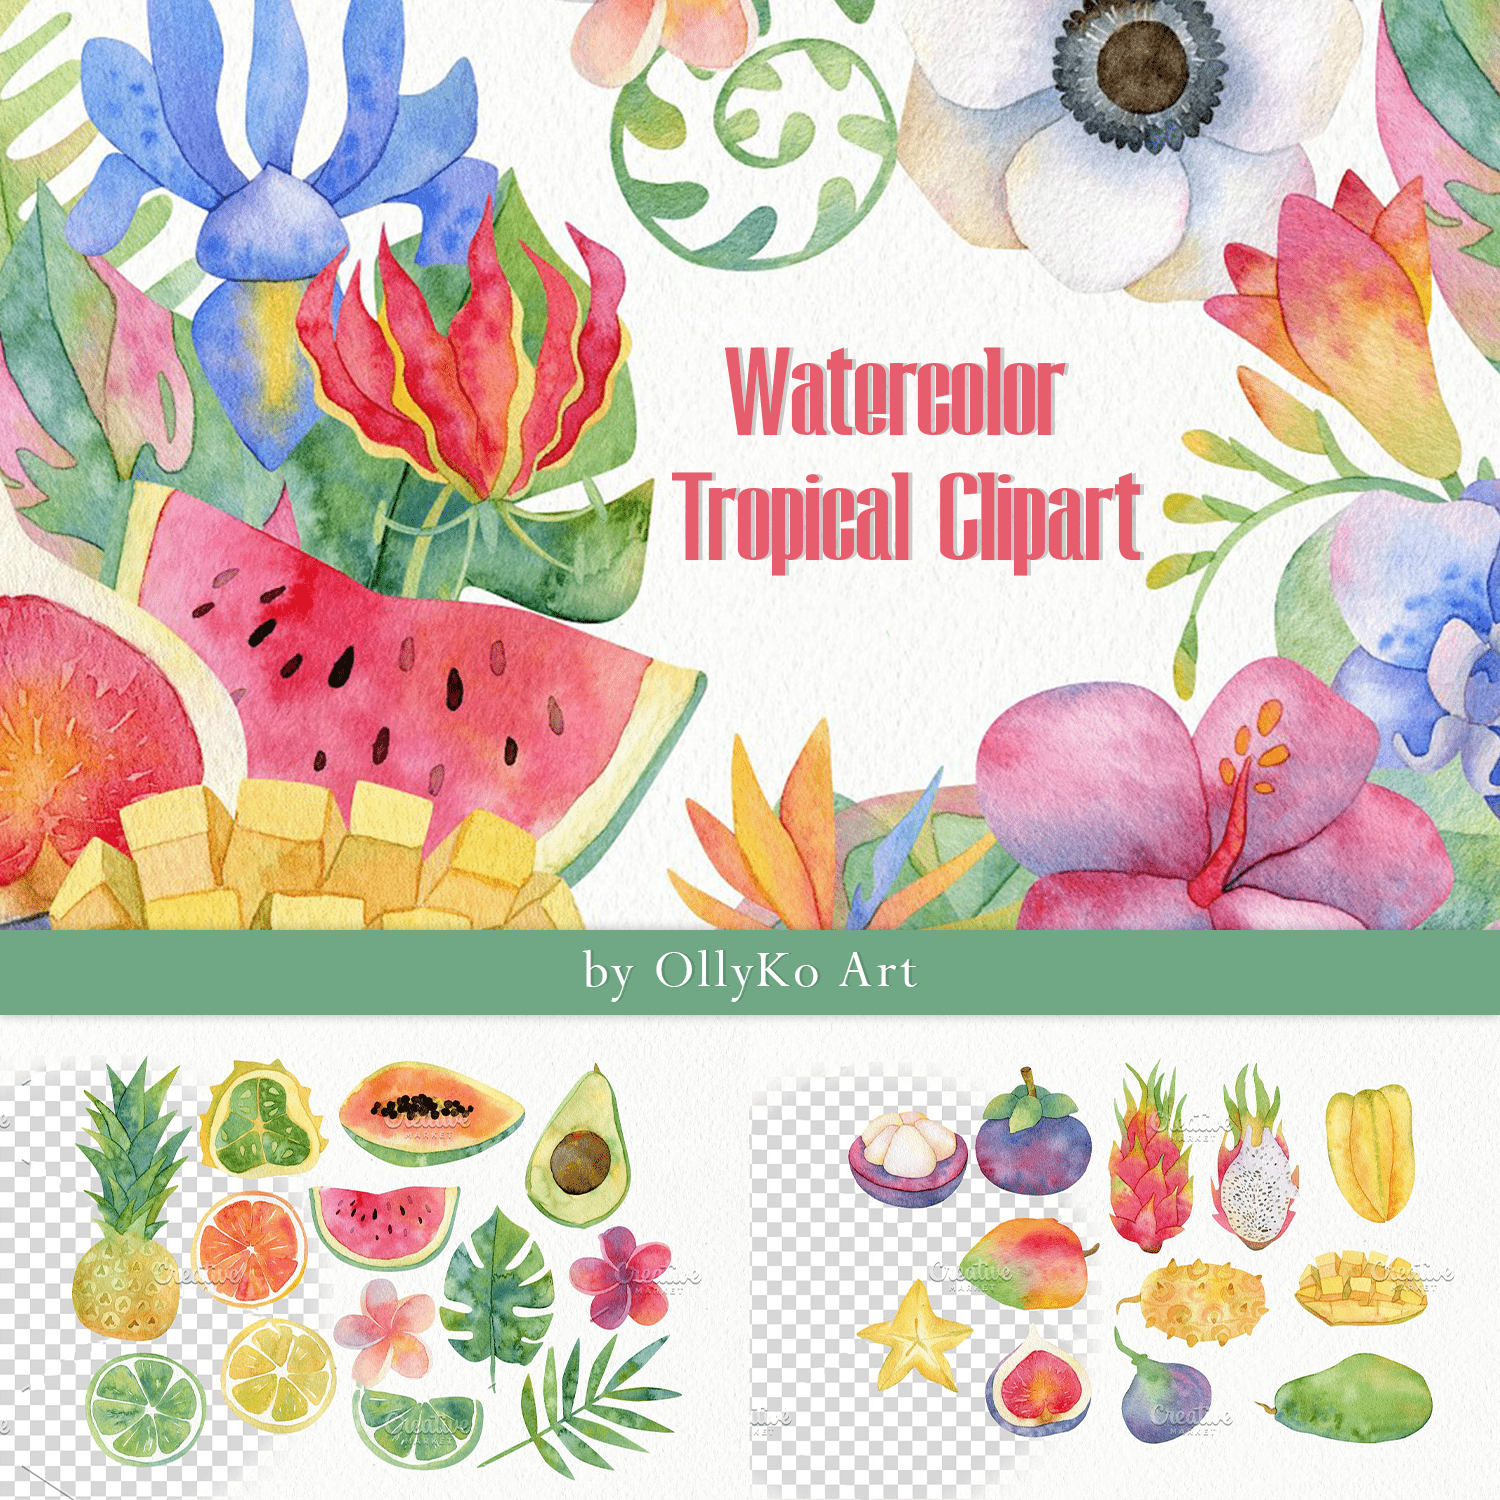 Watercolor Tropical Clipart cover.